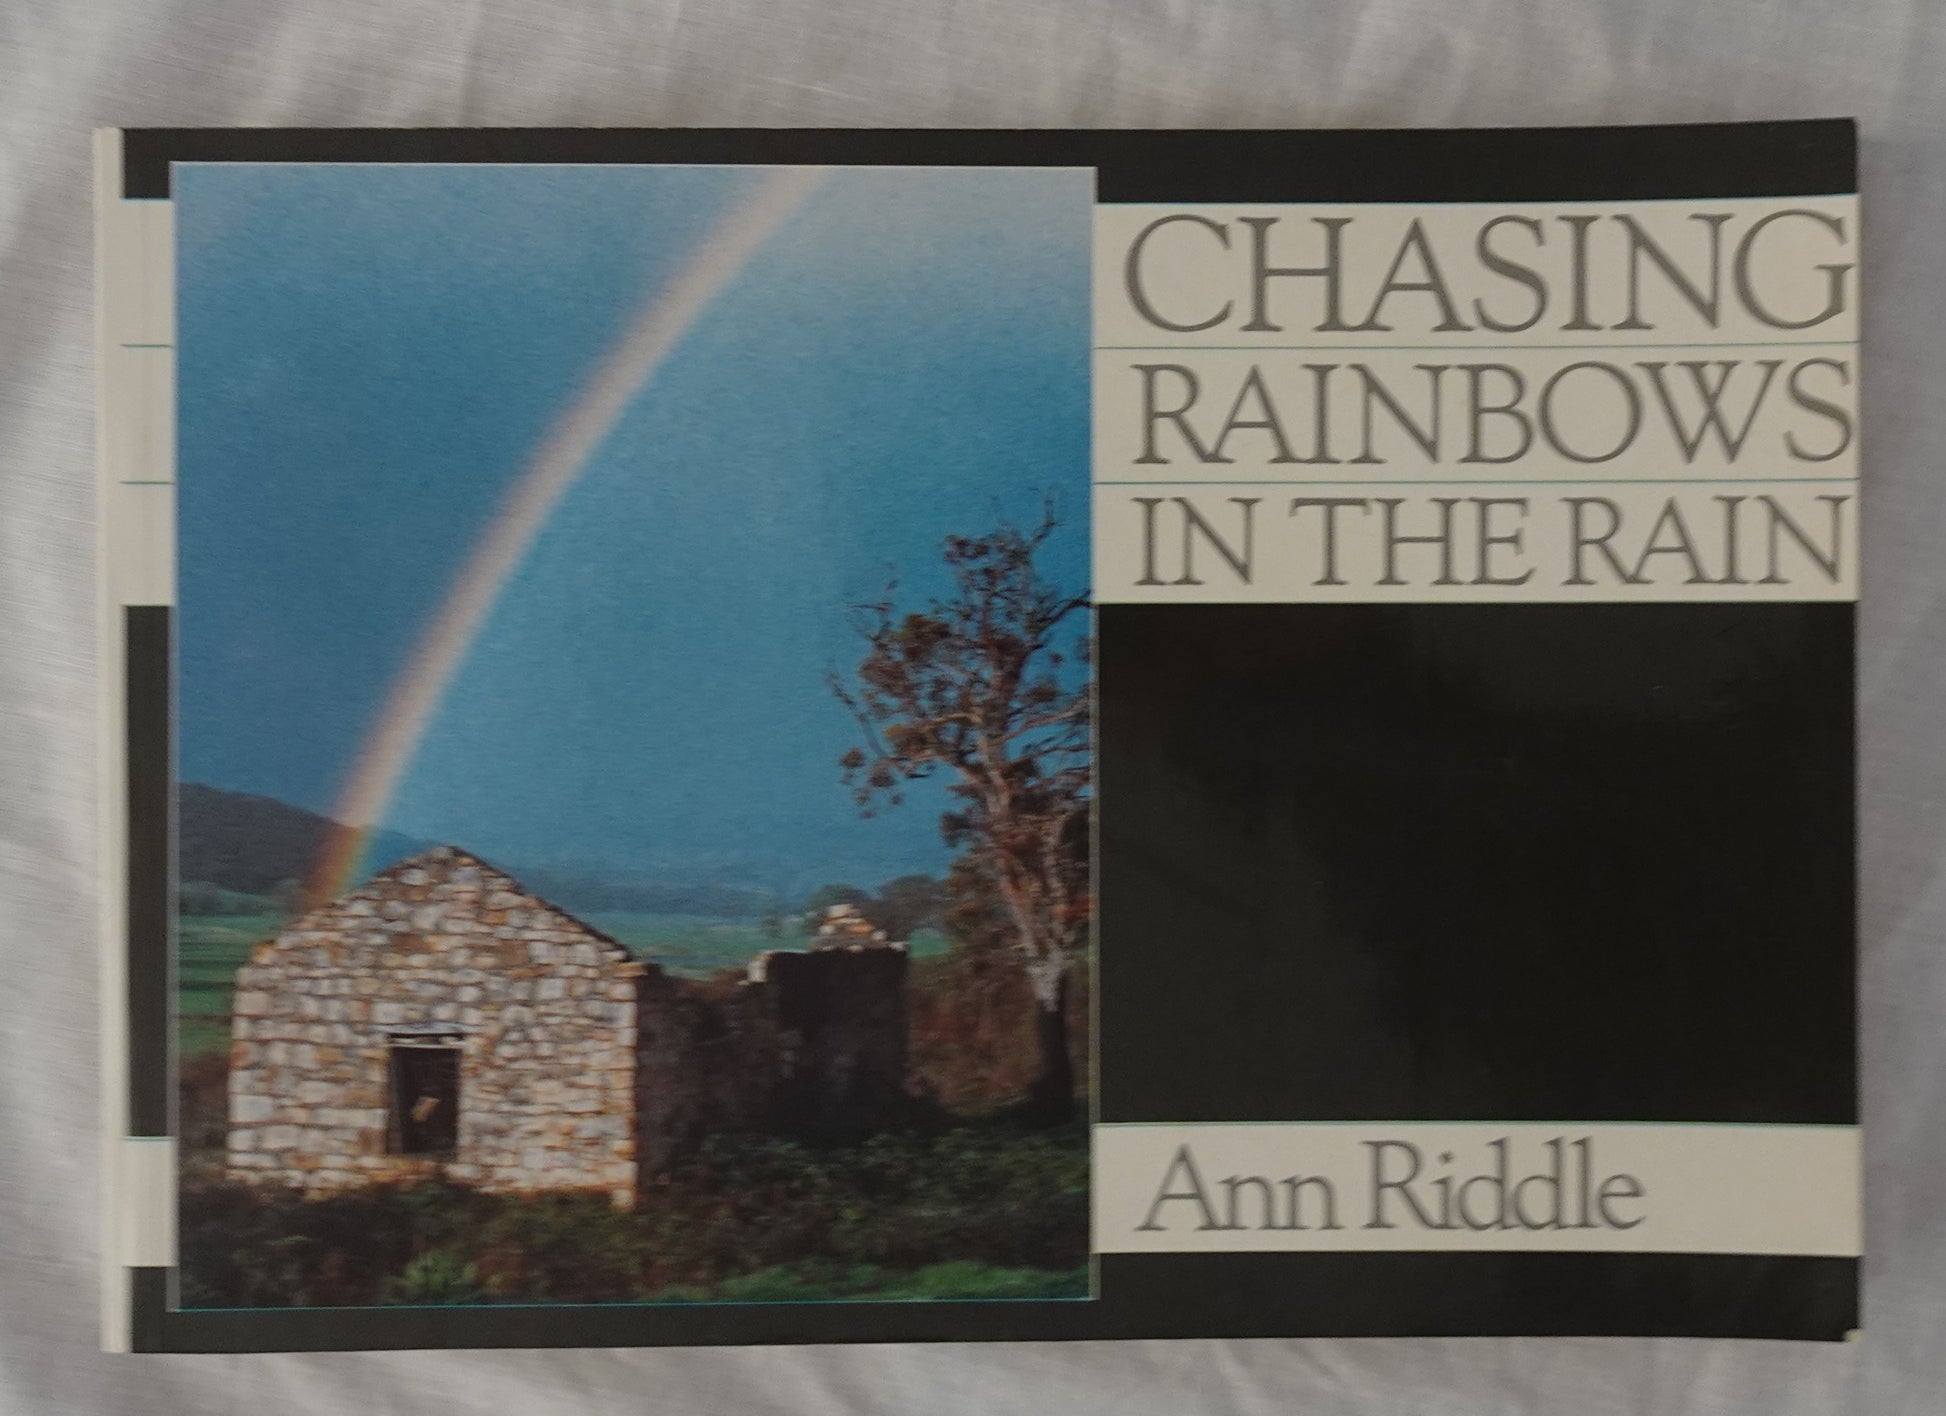 Chasing Rainbows in the Rain  A history of Mt. Compass, Nangkita, Tooperang and Yundi  by Ann Riddle